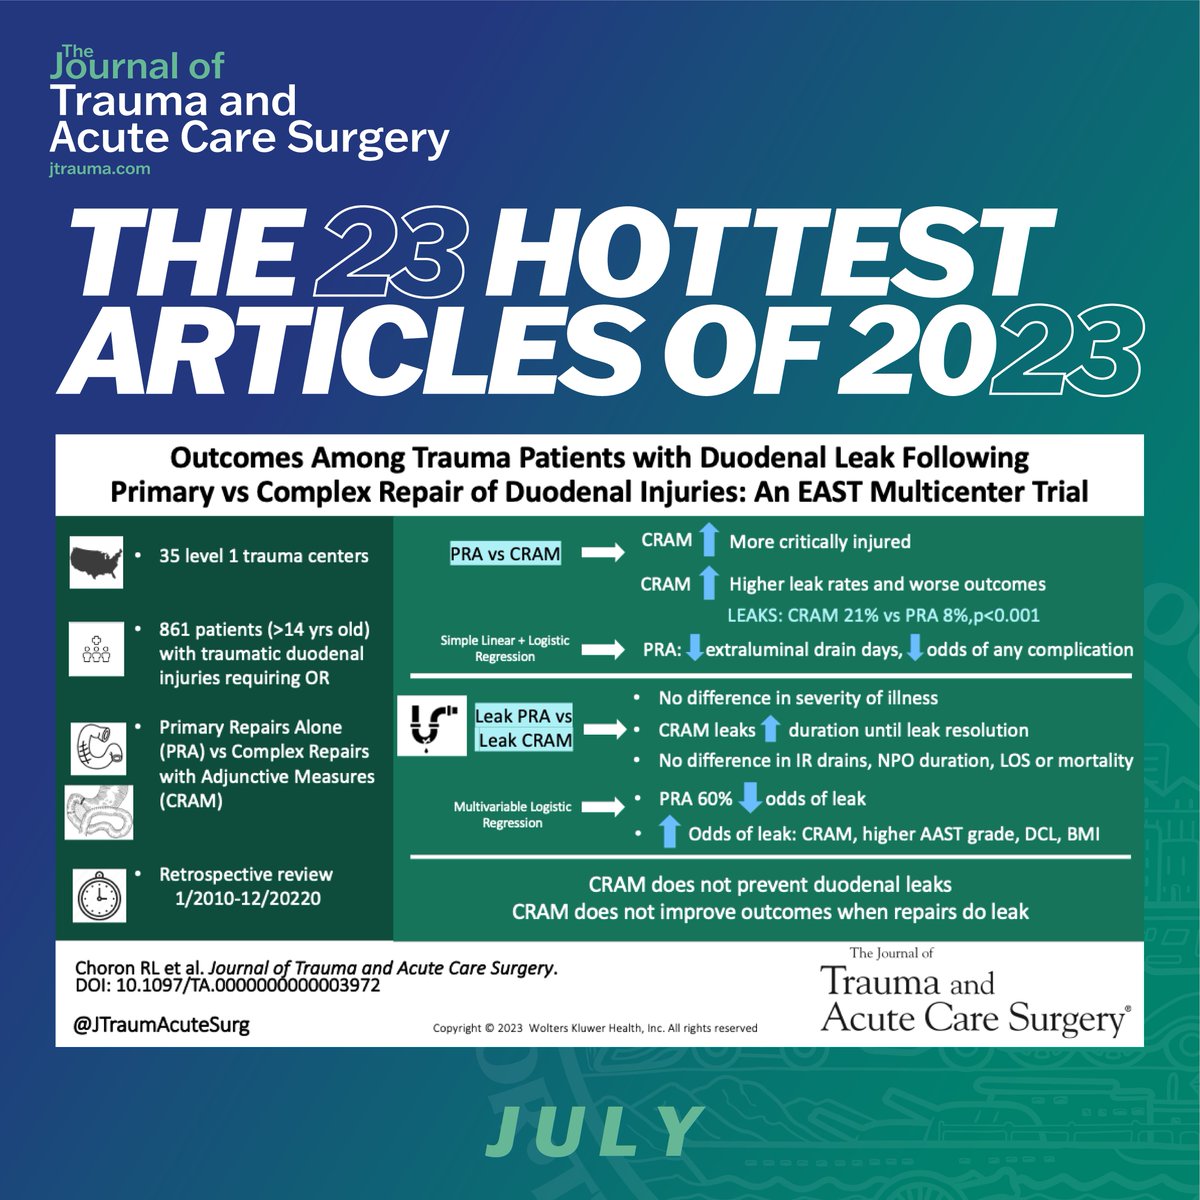 🔥JTACS's Hottest 23 Articles of 2023🔥 1️⃣1️⃣ 'Outcomes among trauma patients with duodenal leak following primary versus complex repair of duodenal injuries: An @EAST_TRAUMA multicenter trial' @RachelChoron @A_Teich @CBargoud @MarkSeamonMD @RandiSmithMD journals.lww.com/jtrauma/pages/…